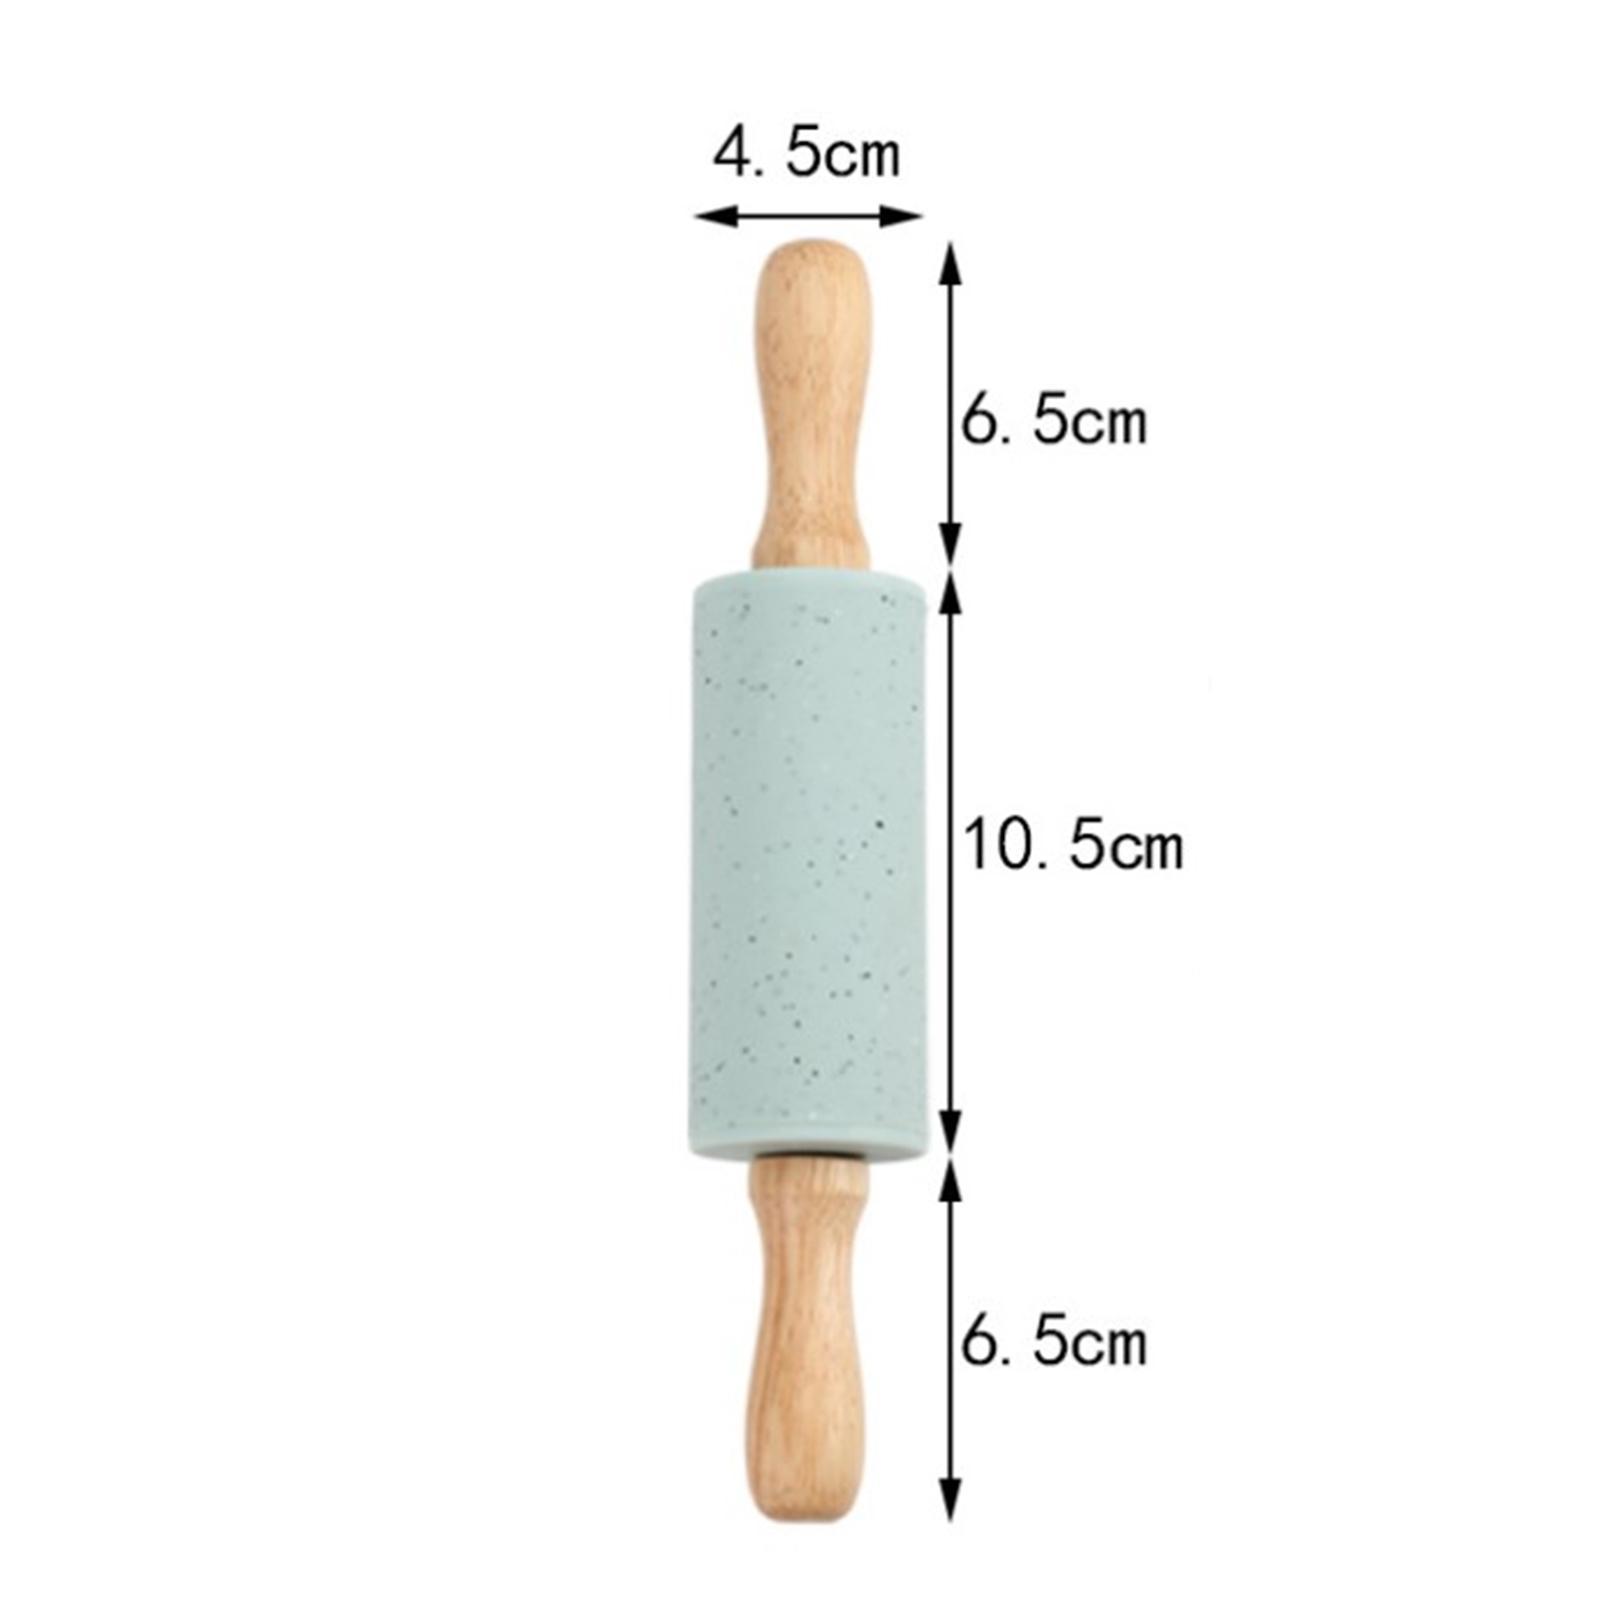 Wooden Rolling Pin for Baking Roller with Handles Handheld Easy Cleaning Roller Baking Tool for The Pastry Pizza Pie Kitchen Gadgets